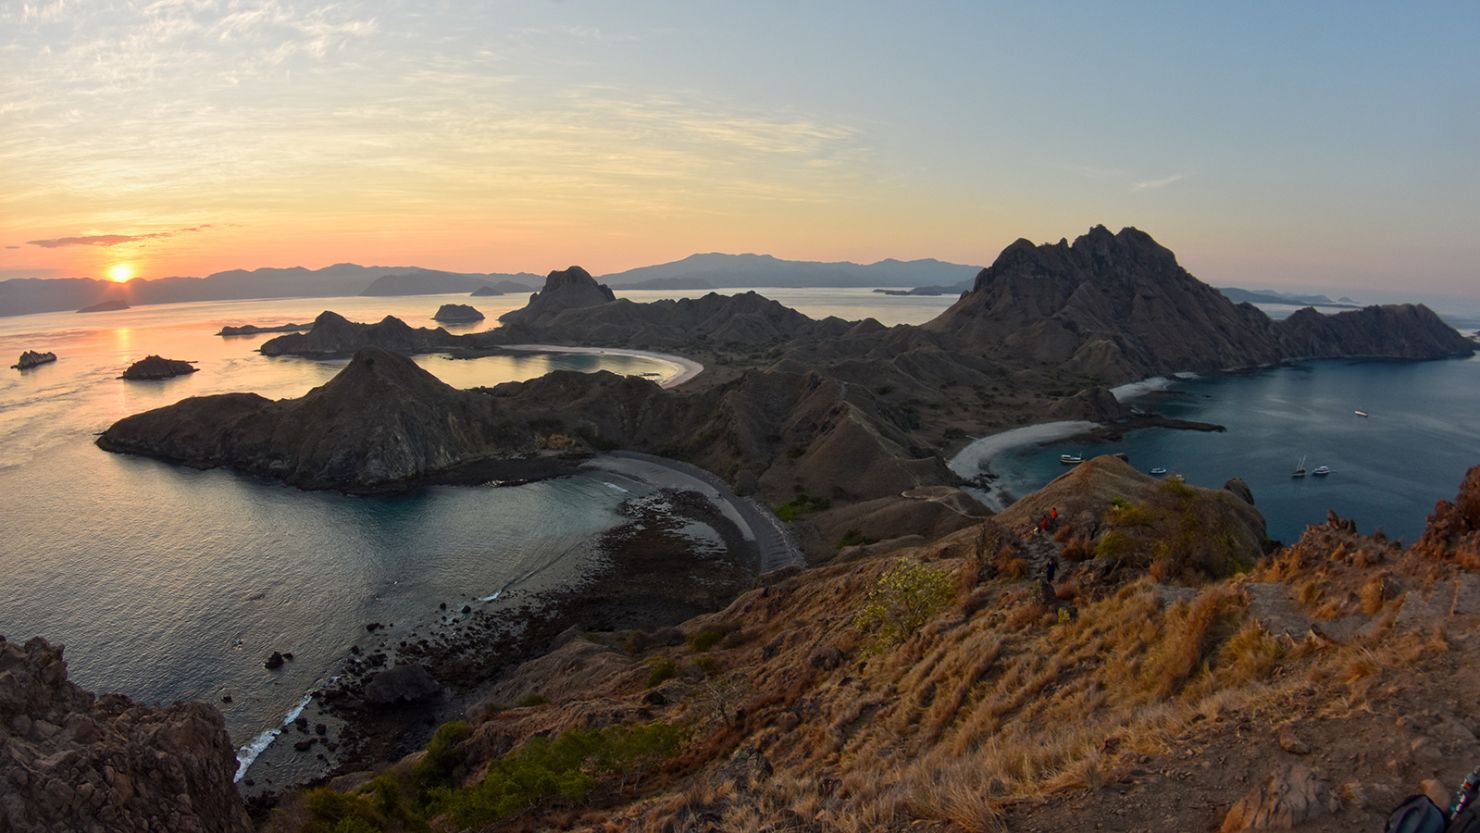 Top view of Padar Island at sunset, Komodo National Park, Indonesia. (Photo by: Andre Seale/VW PICS/Universal Images Group via Getty Images)